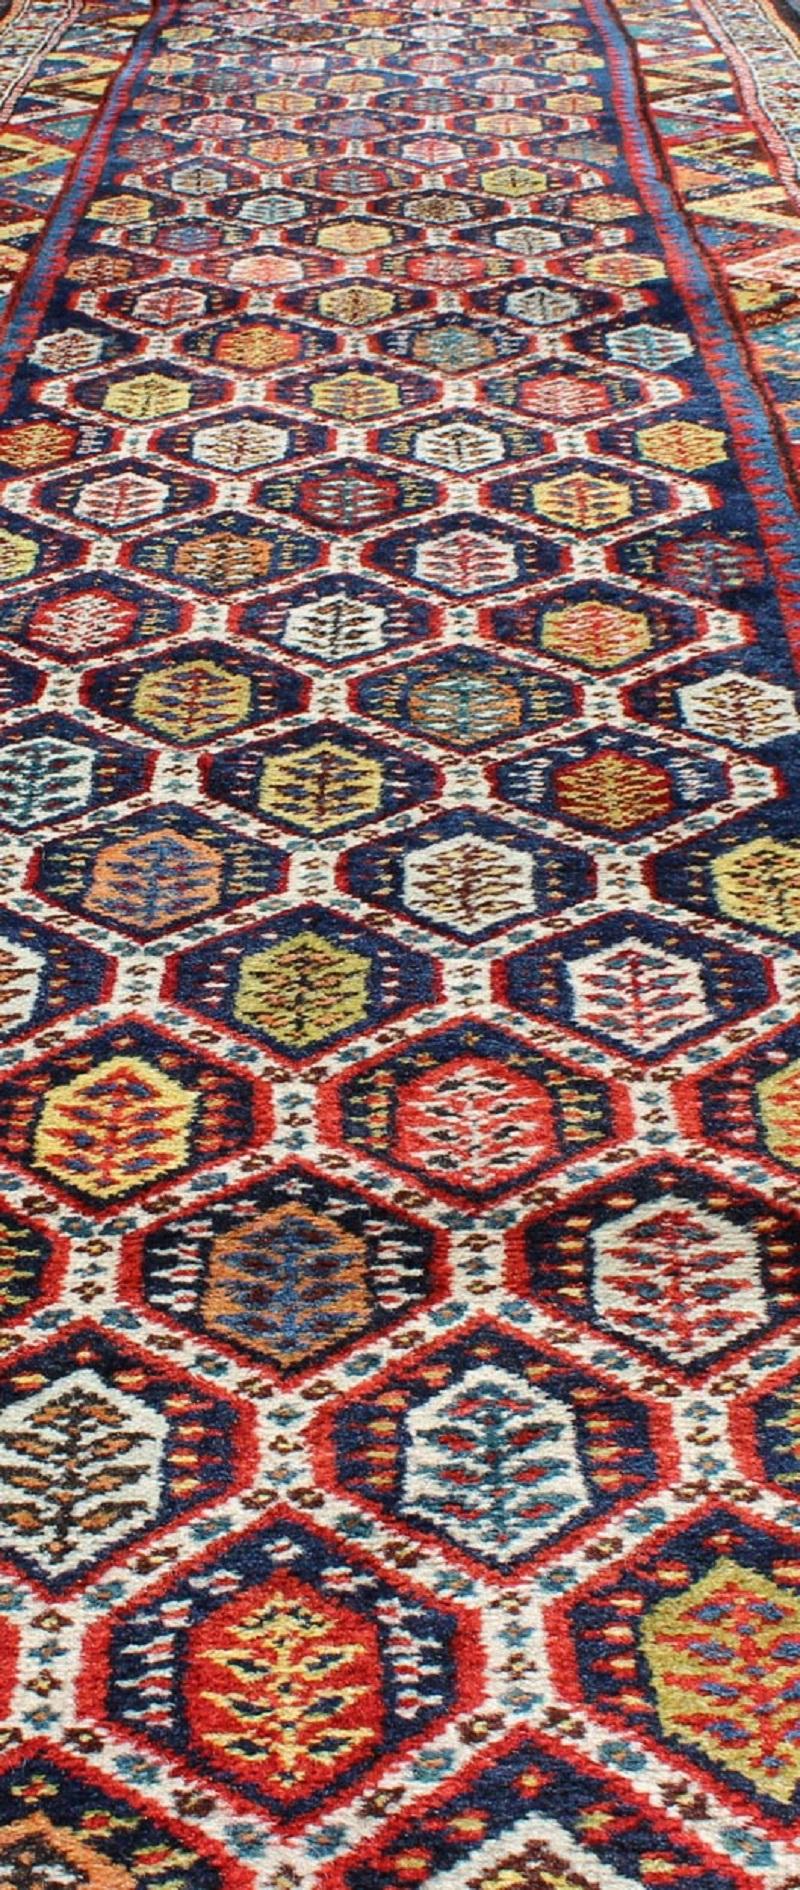 Early 20th Century Colorful Antique Persian Lori Runner with Repeating Geometric Palmette Design For Sale